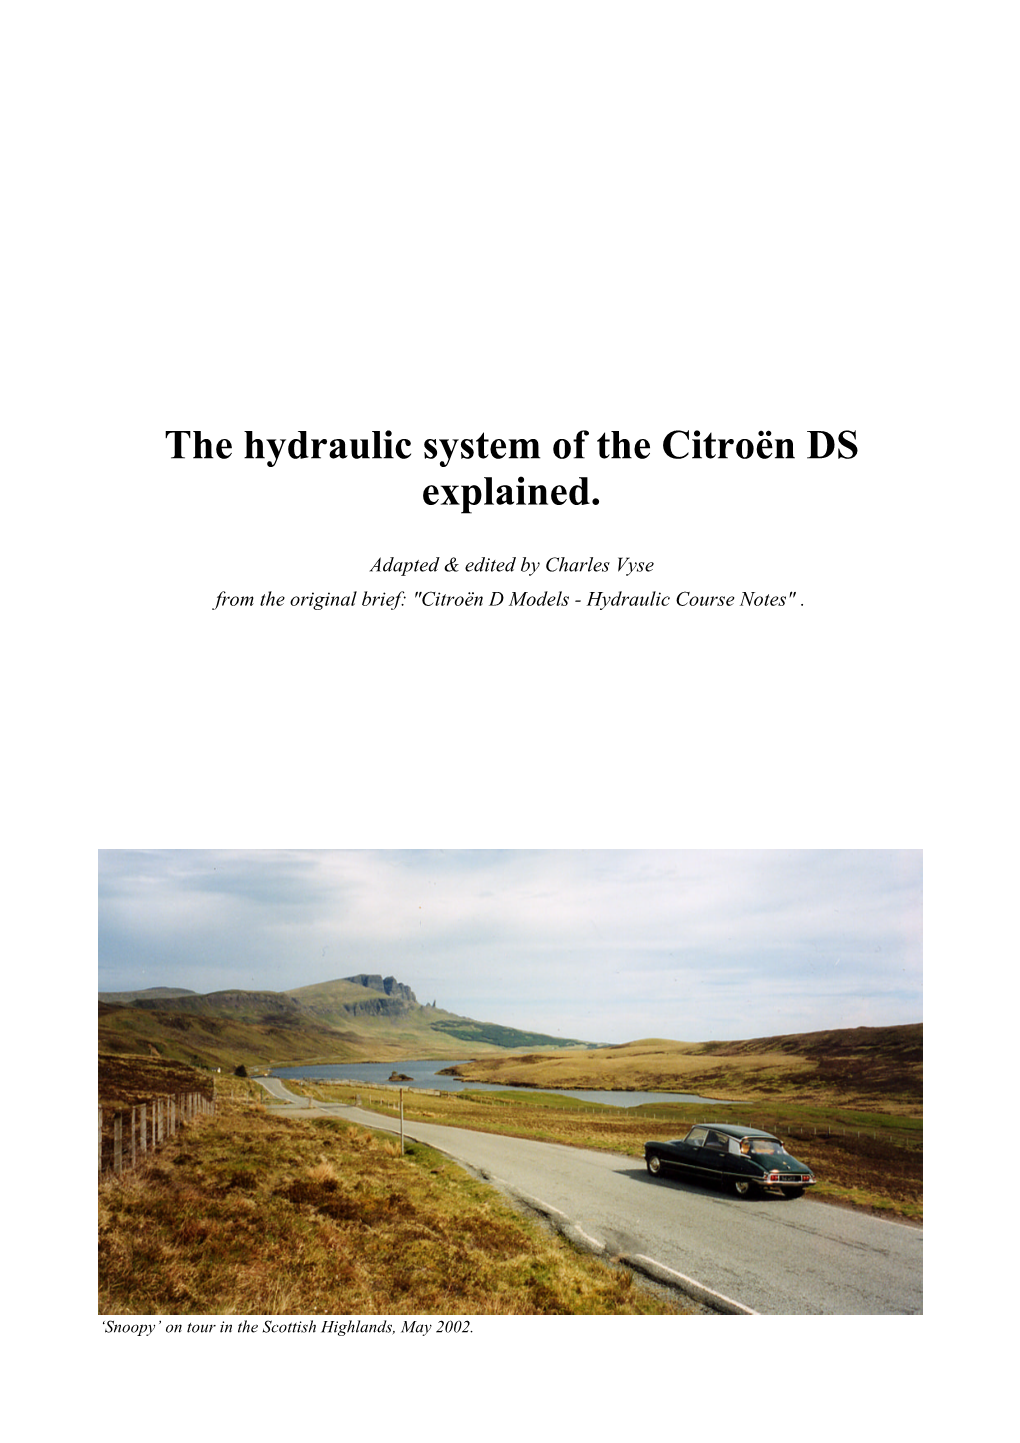 The Hydraulic System of the Citroën DS Explained